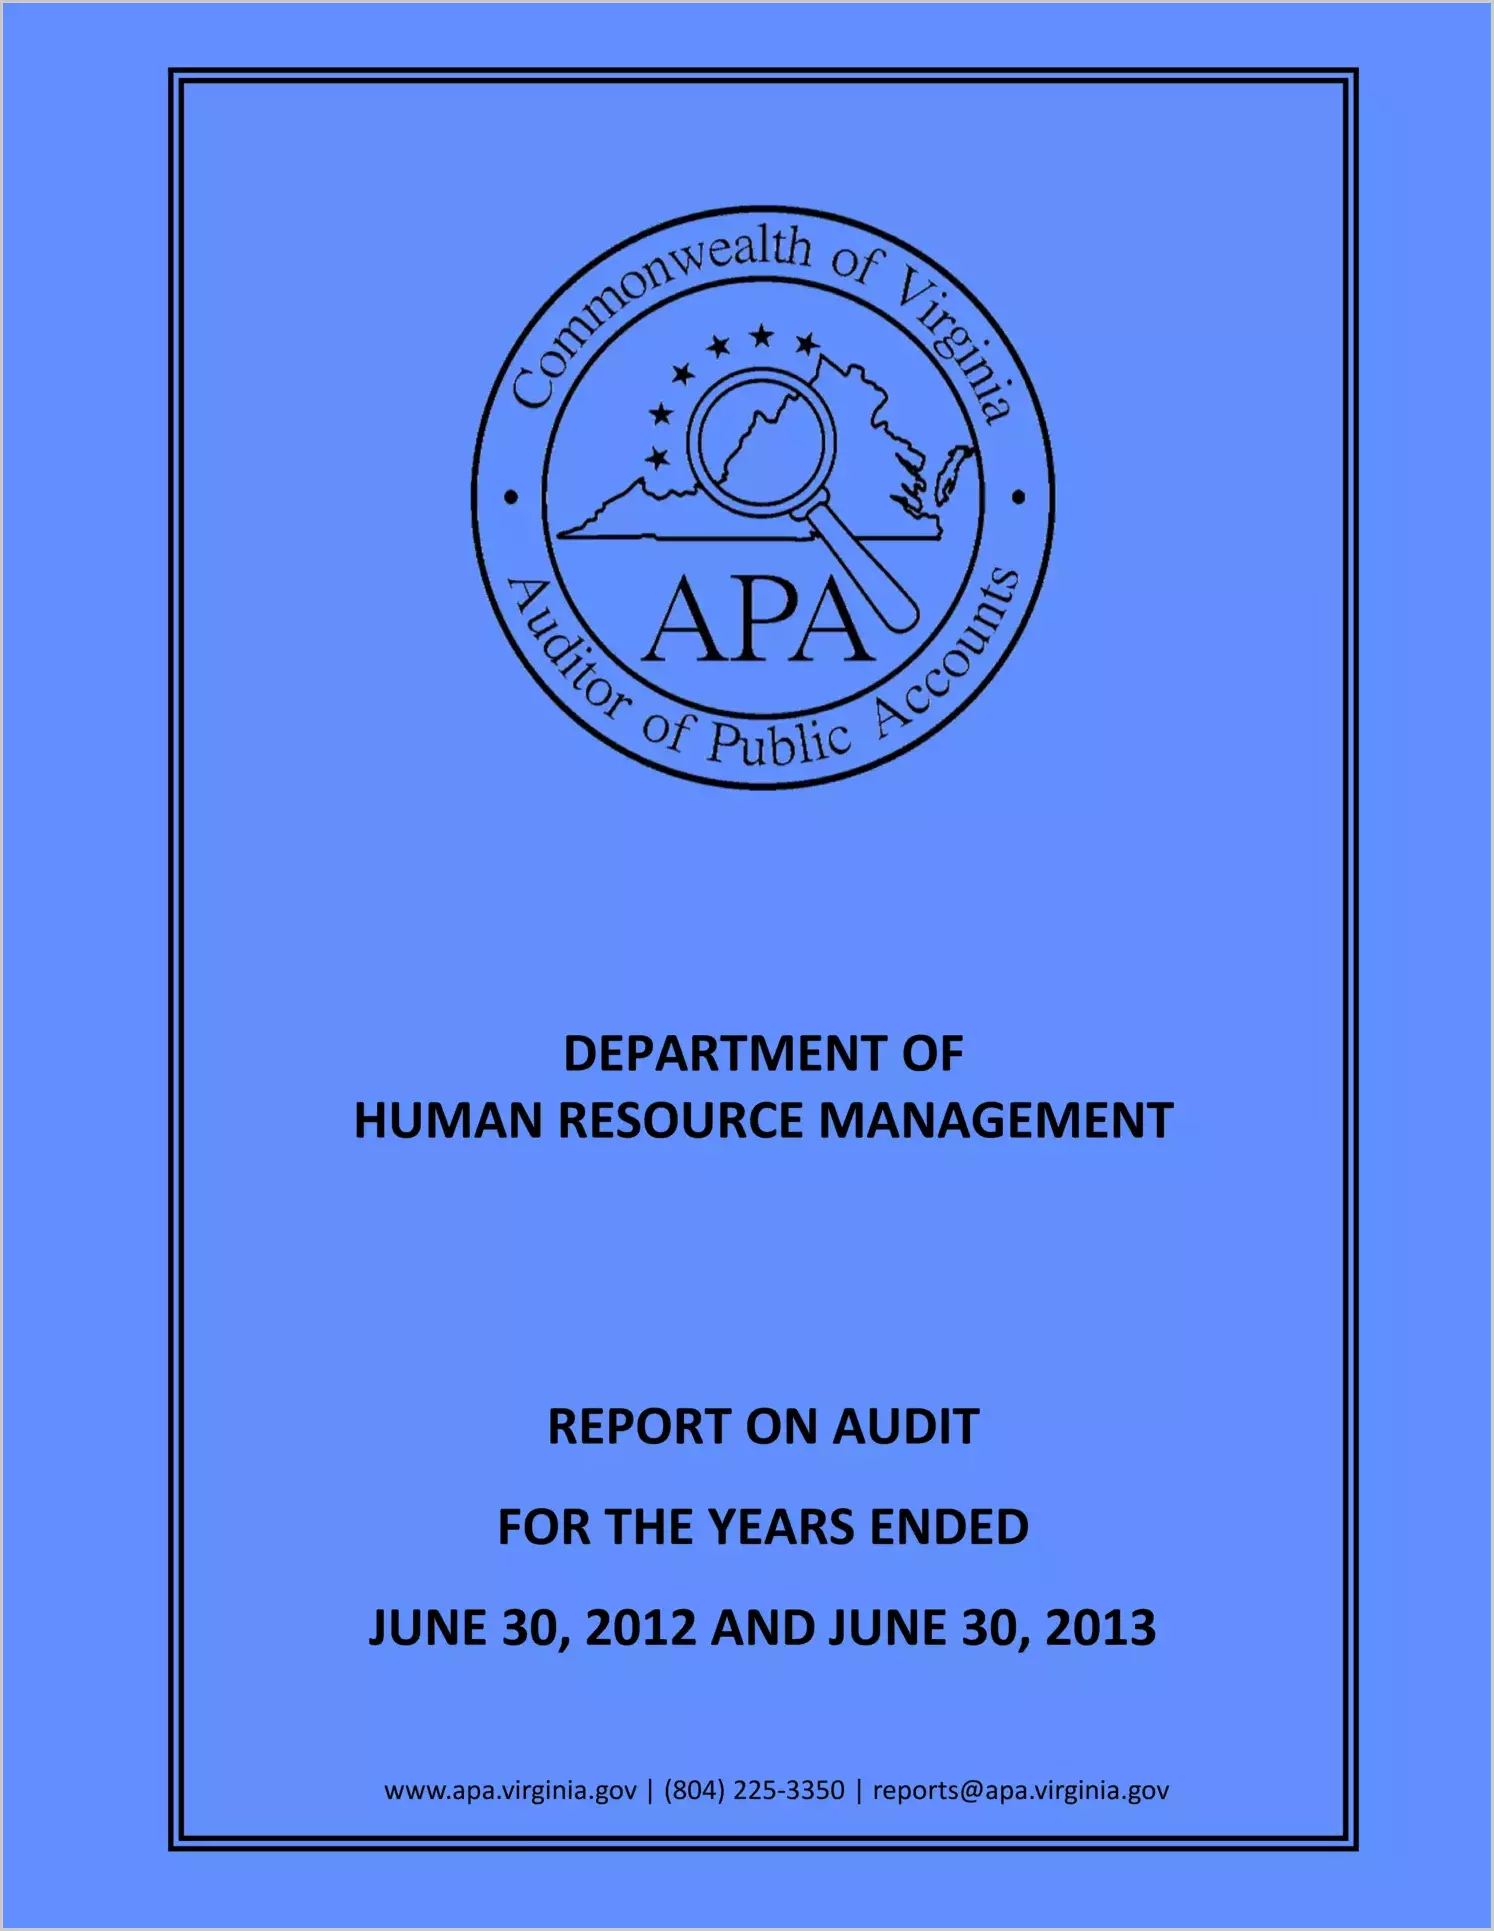 Department of Human Resource Management for the two year period ended June 30, 2012 and June 30, 2013